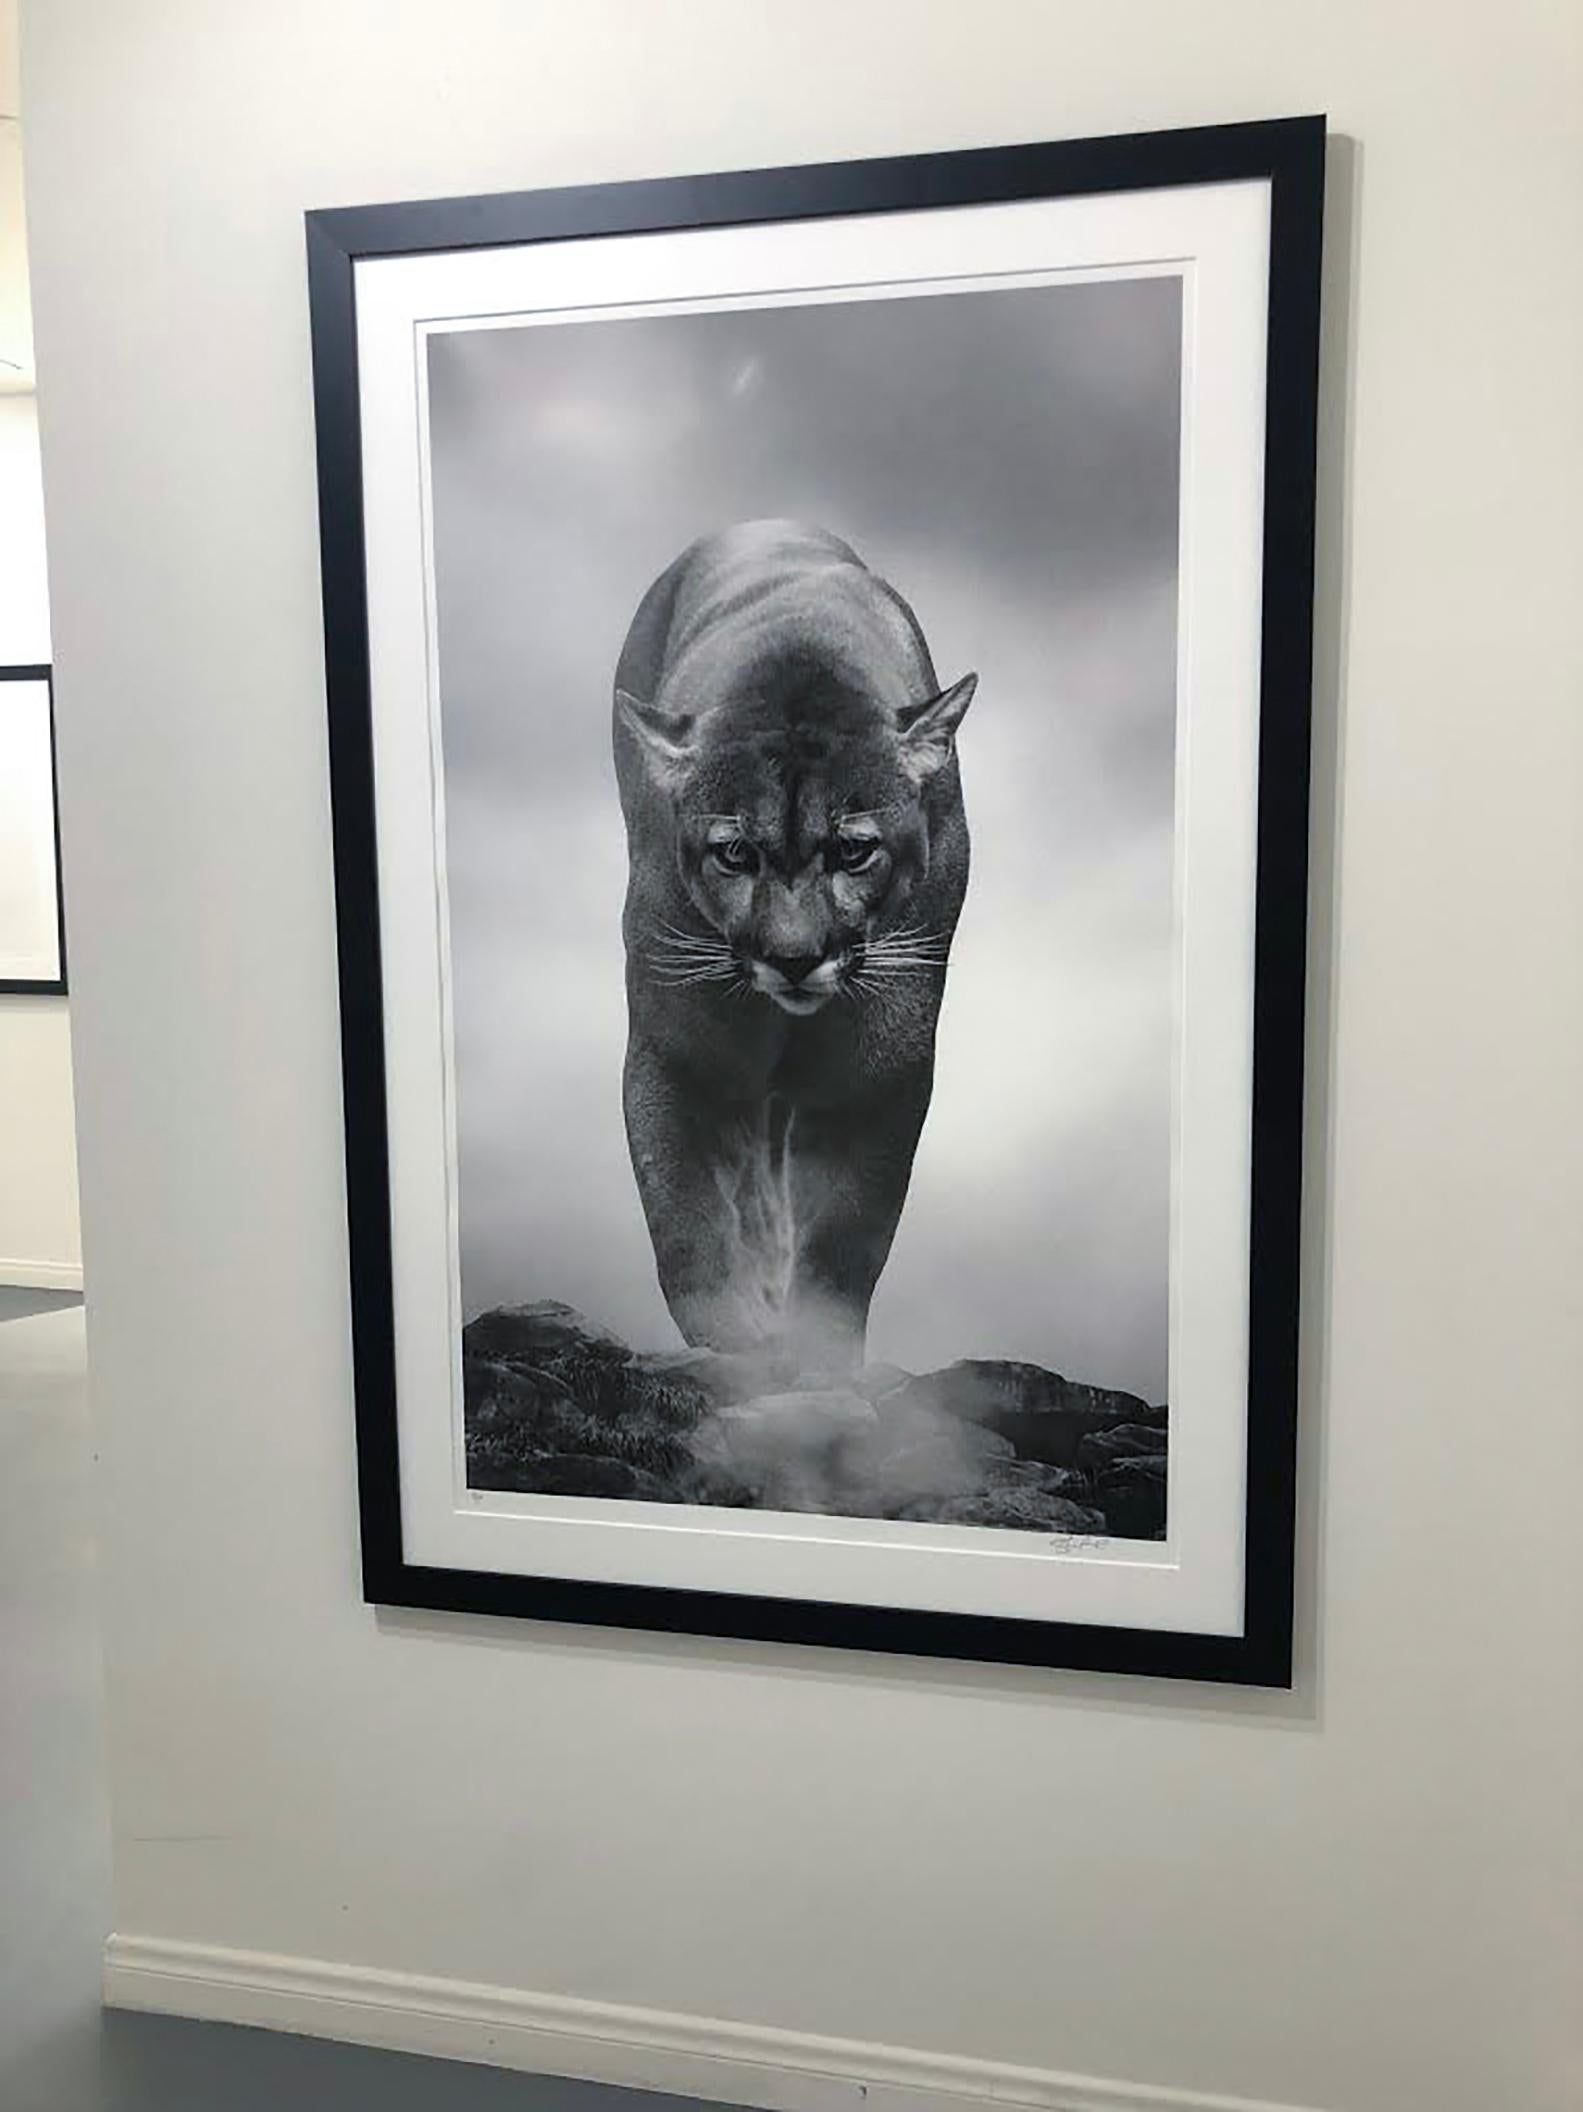 King of the Mountain - 36x48 Black and White Photography, Cougar, Mountain Lion 1